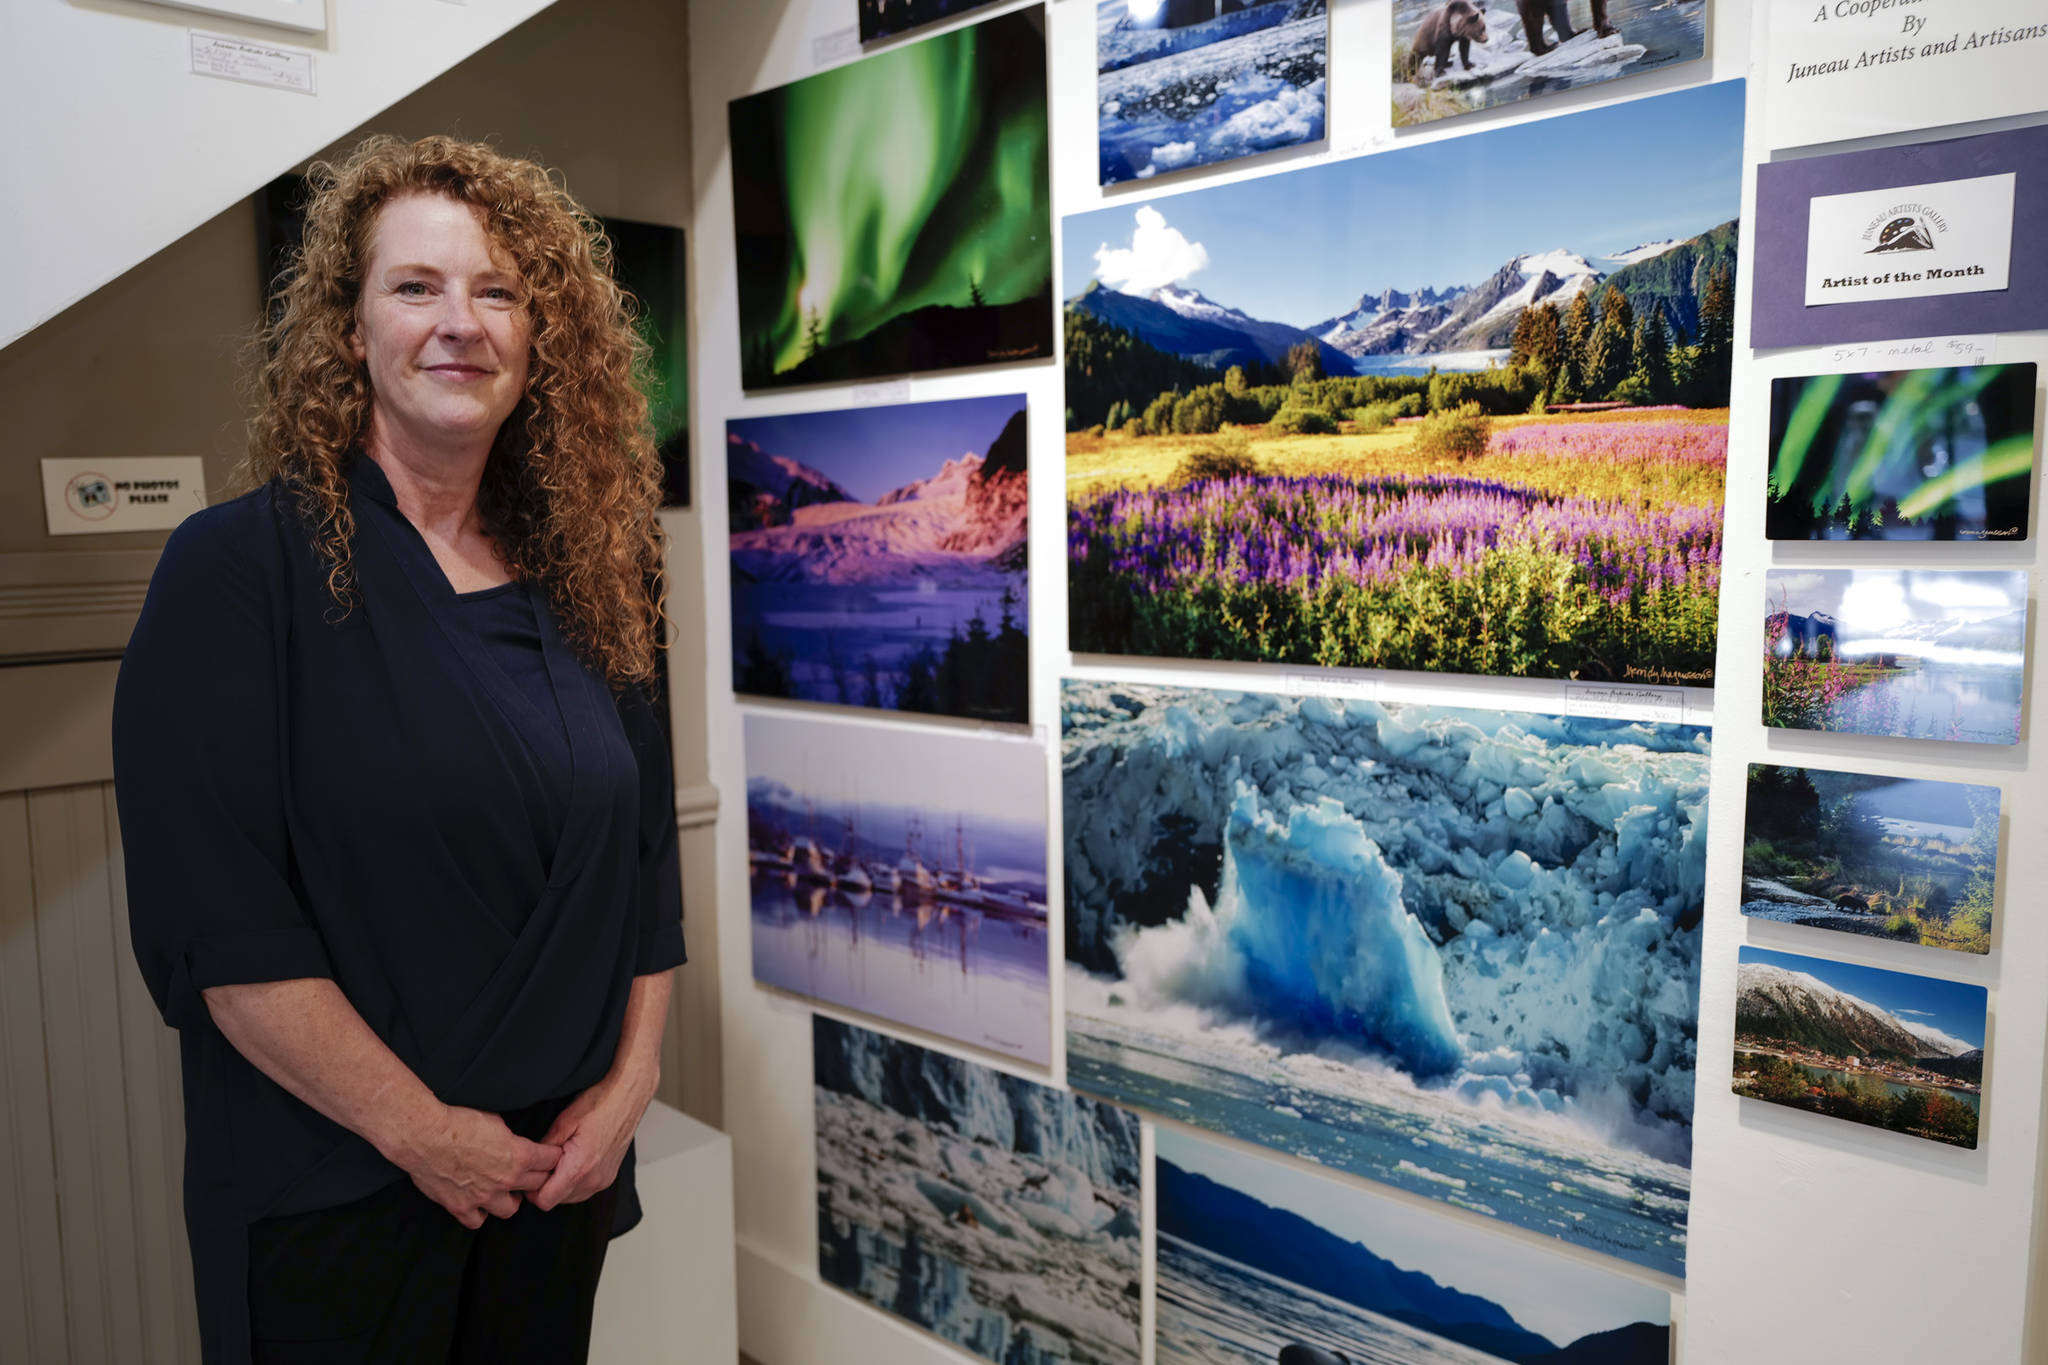 Merridy Magnussson shows off her photography as the featured artist at the Juneau Artist’s Gallery during First Friday on Friday, Aug. 2, 2019. (Michael Penn | Juneau Empire)